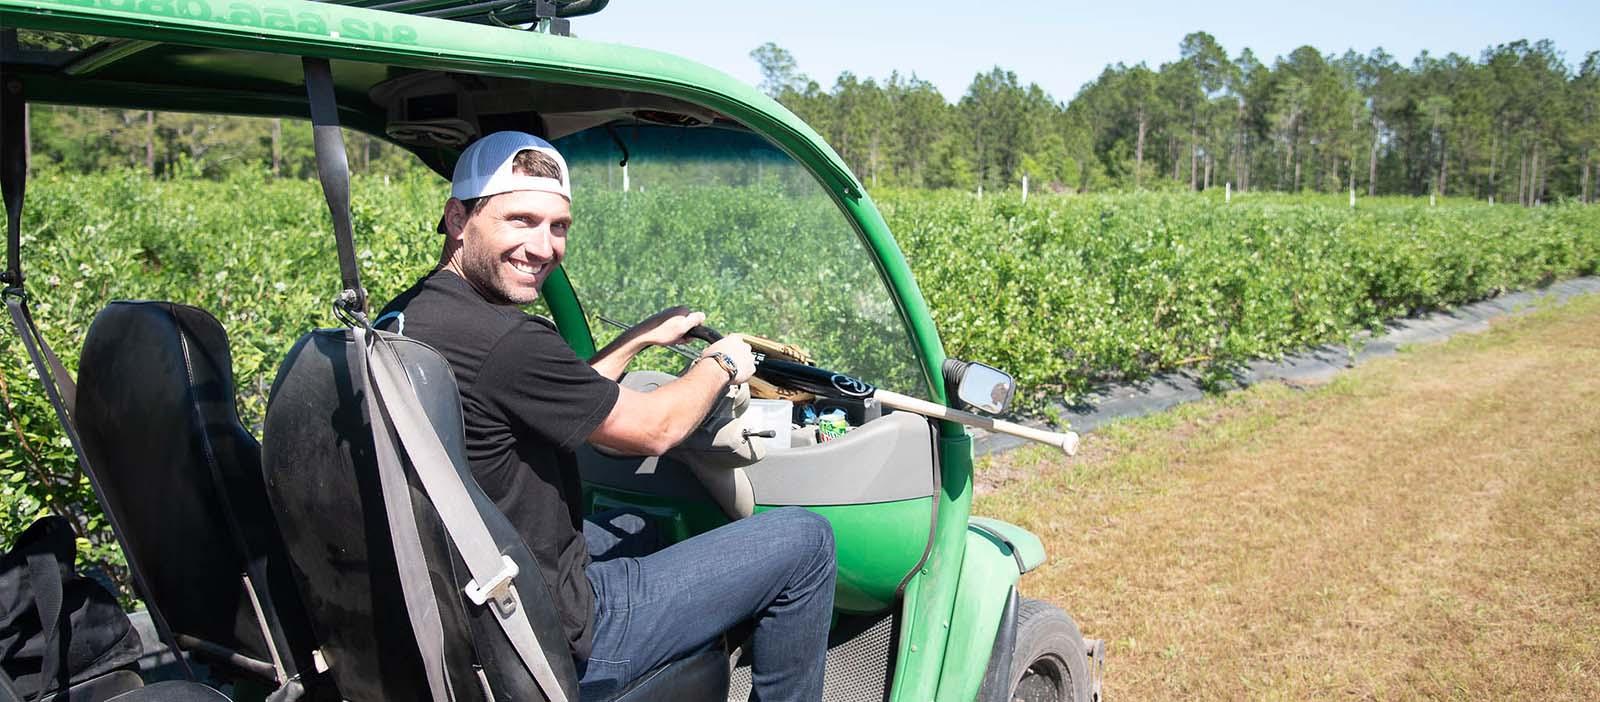 Former Atlanta Brave Jeff Francoeur and his family’s successful berry farm